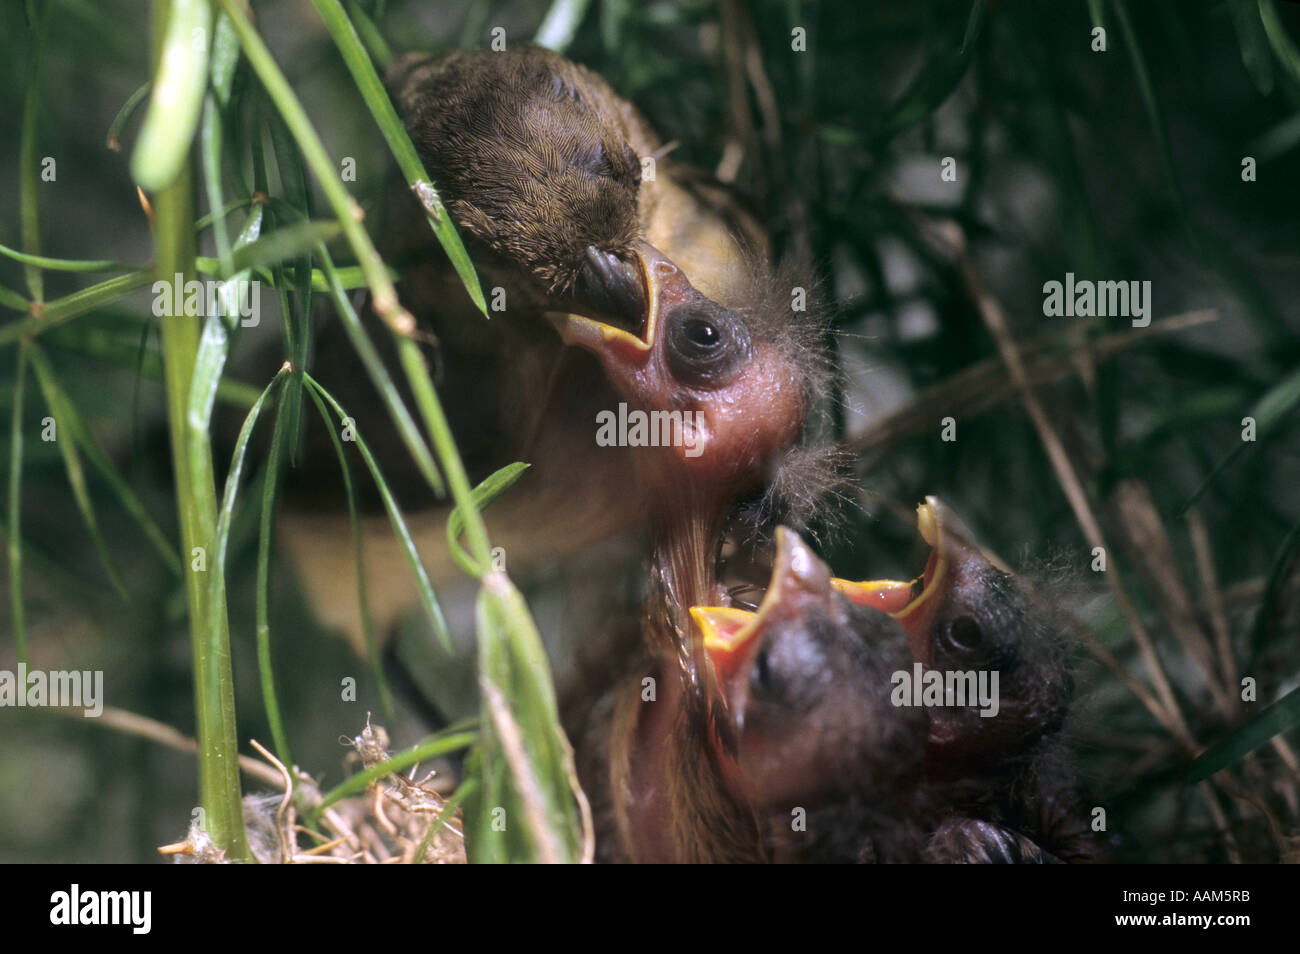 Brazilian fauna, hungry young animals. Young birds in the nest being feeded by their mother. Stock Photo